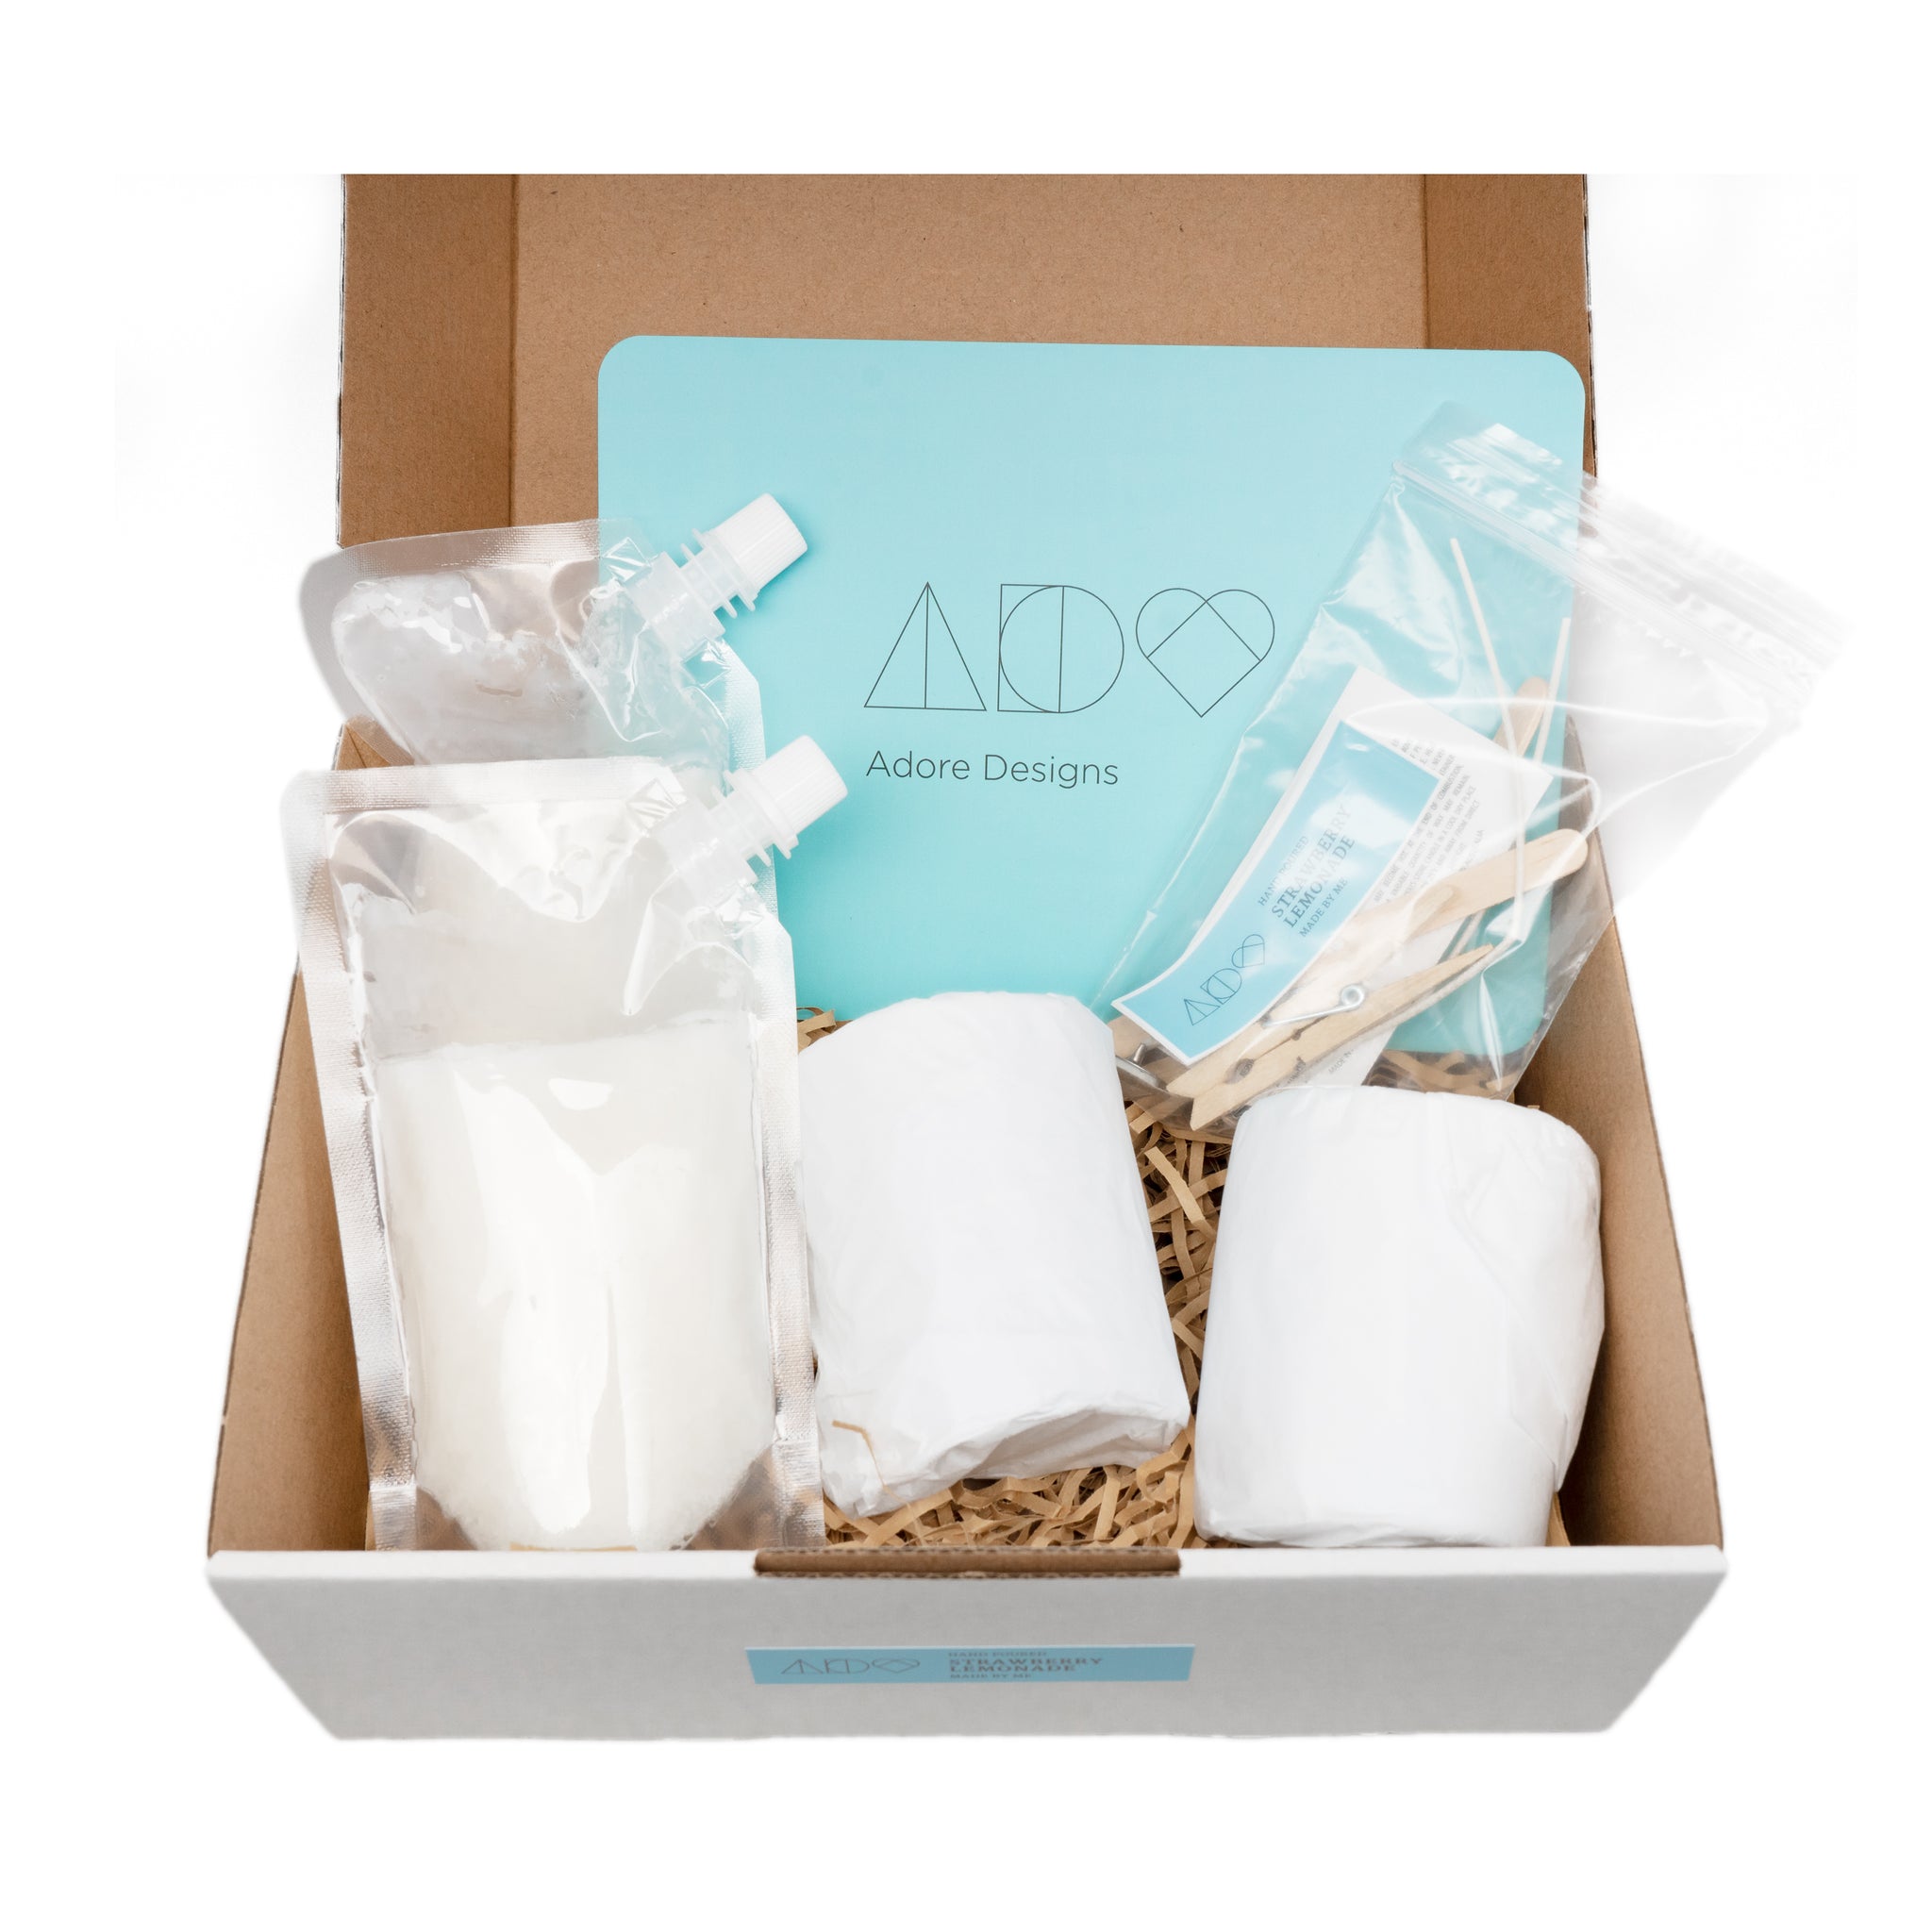 Create Your Own Candle Kit